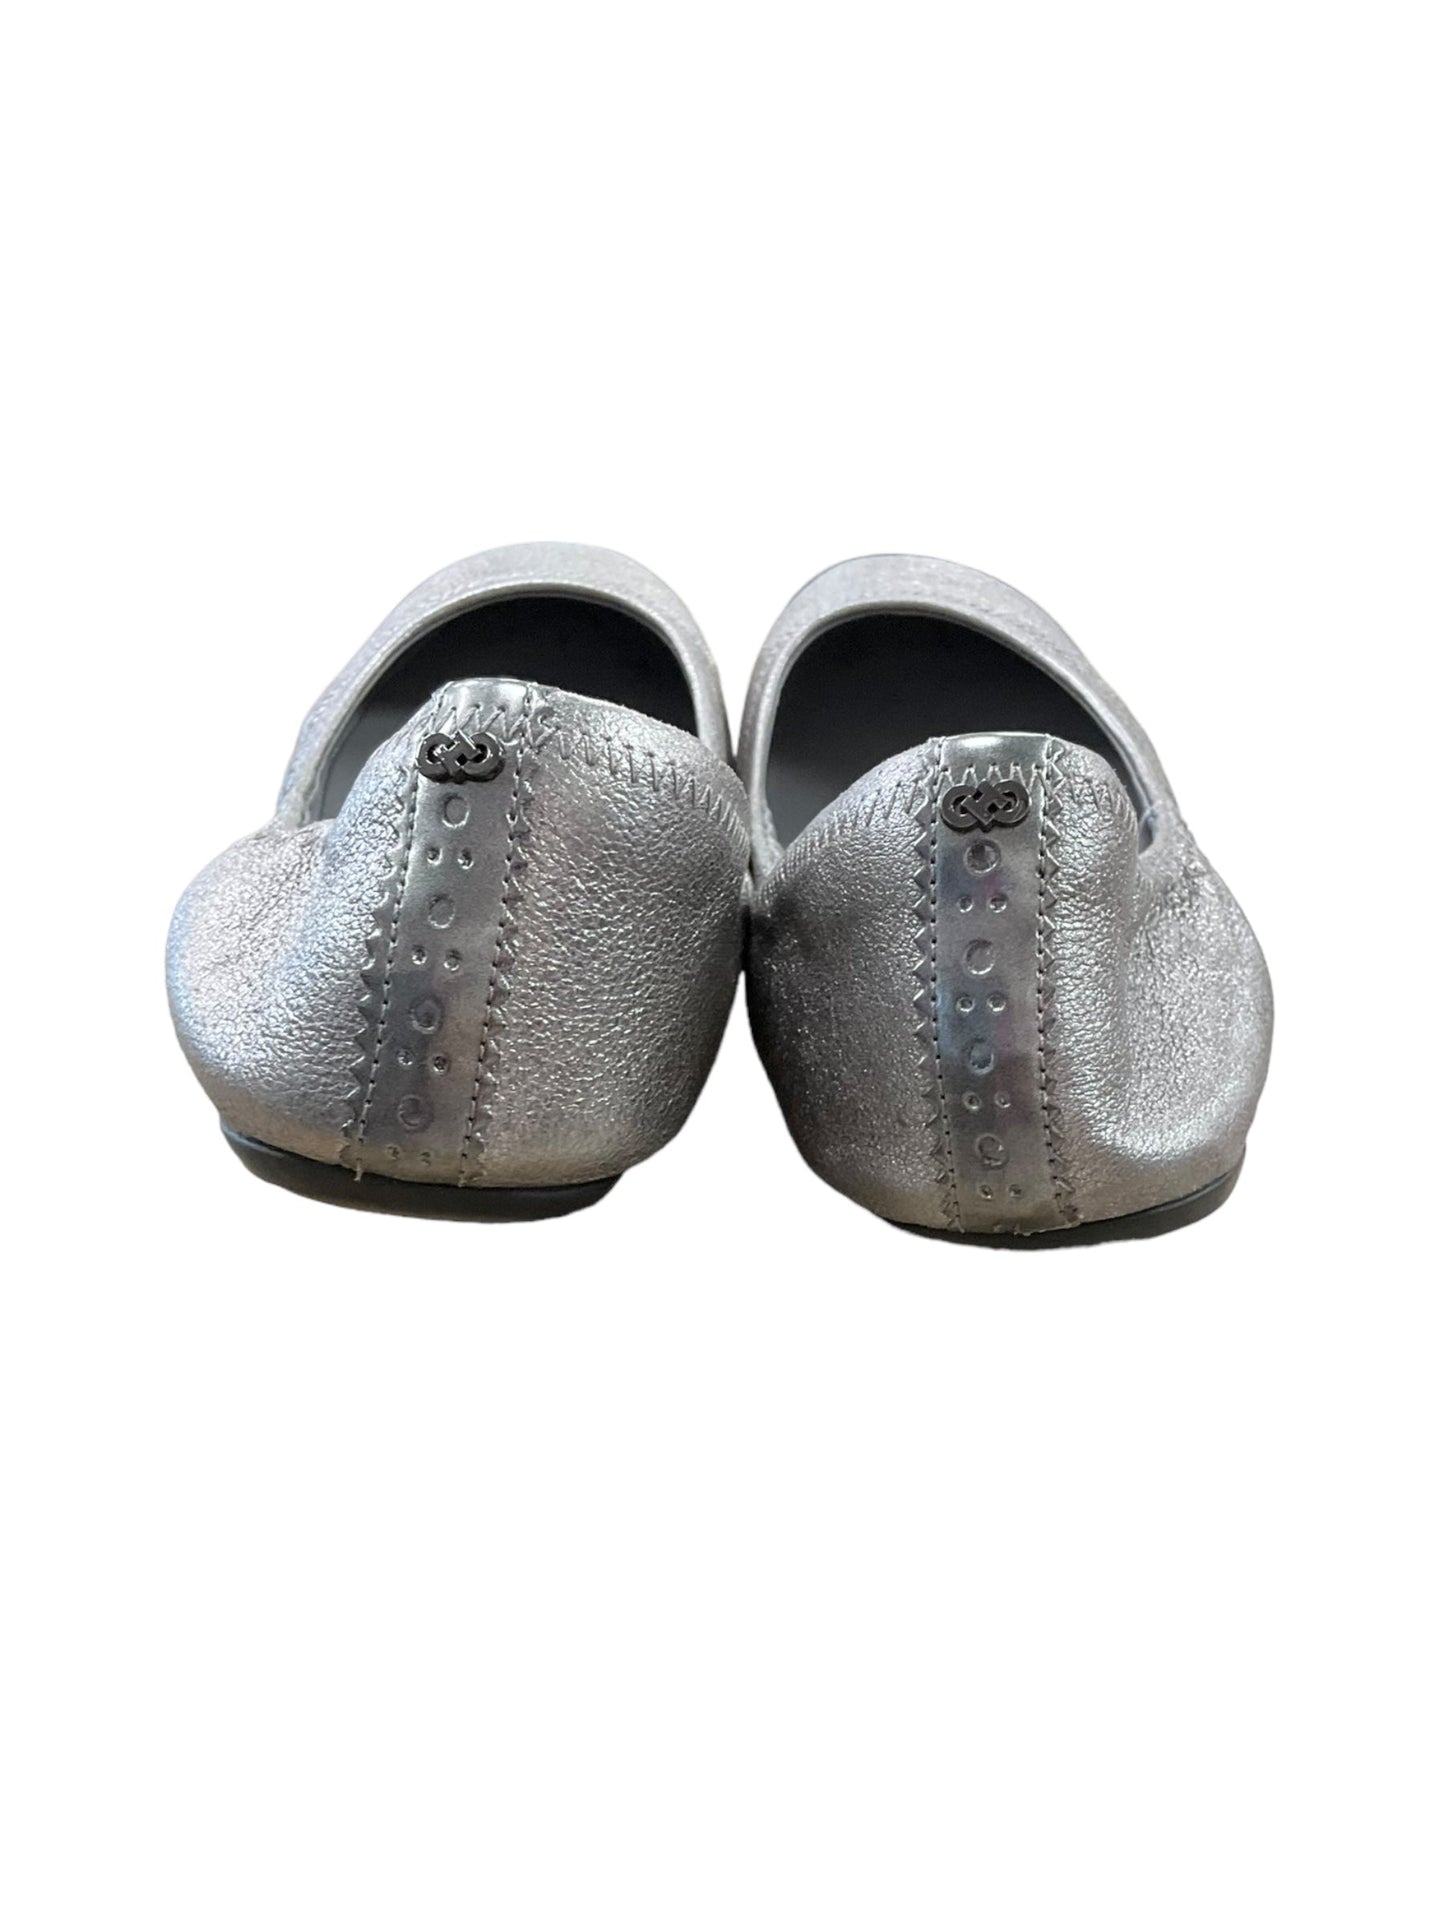 Silver Shoes Flats Cole-haan, Size 6.5